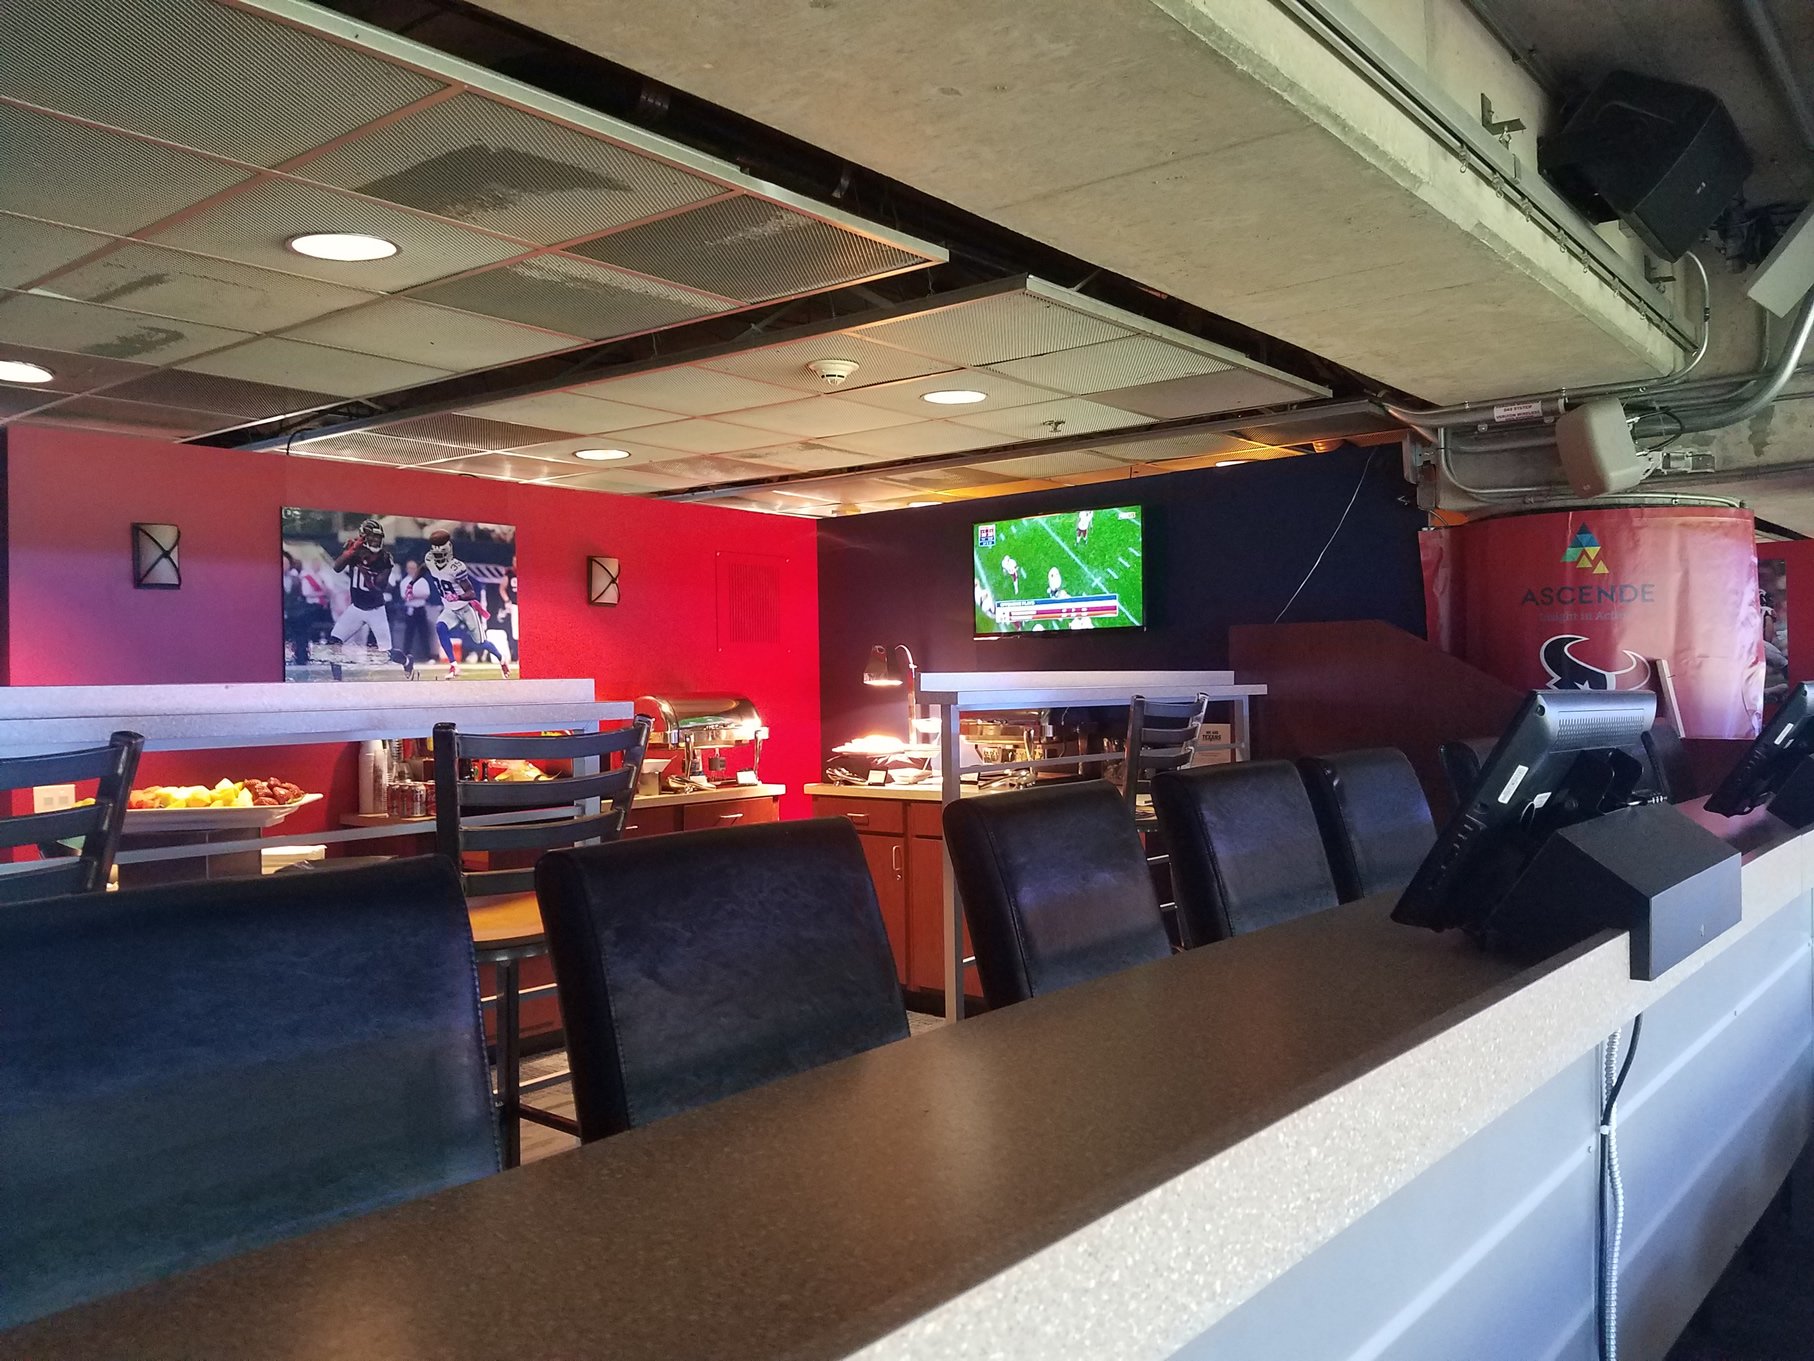 texans single game suite cost